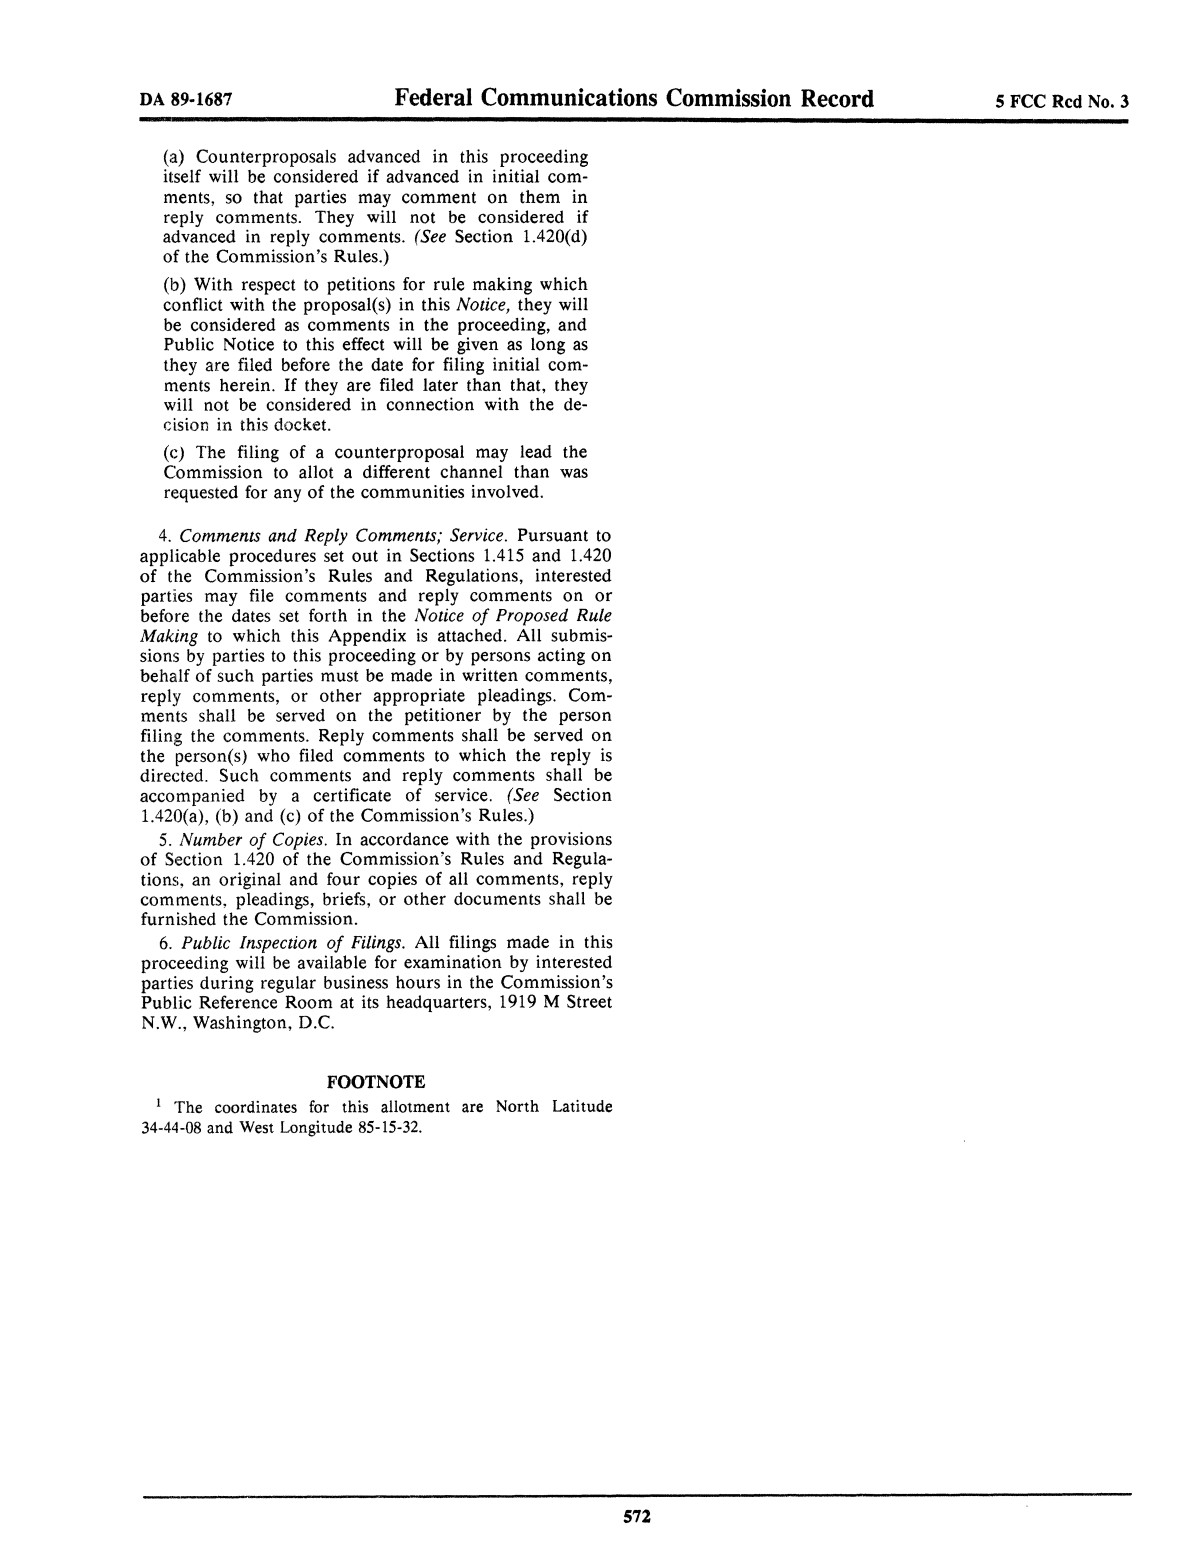 FCC Record, Volume 5, No. 3, Pages 556 to 796, January 29 - February 9, 1990
                                                
                                                    572
                                                